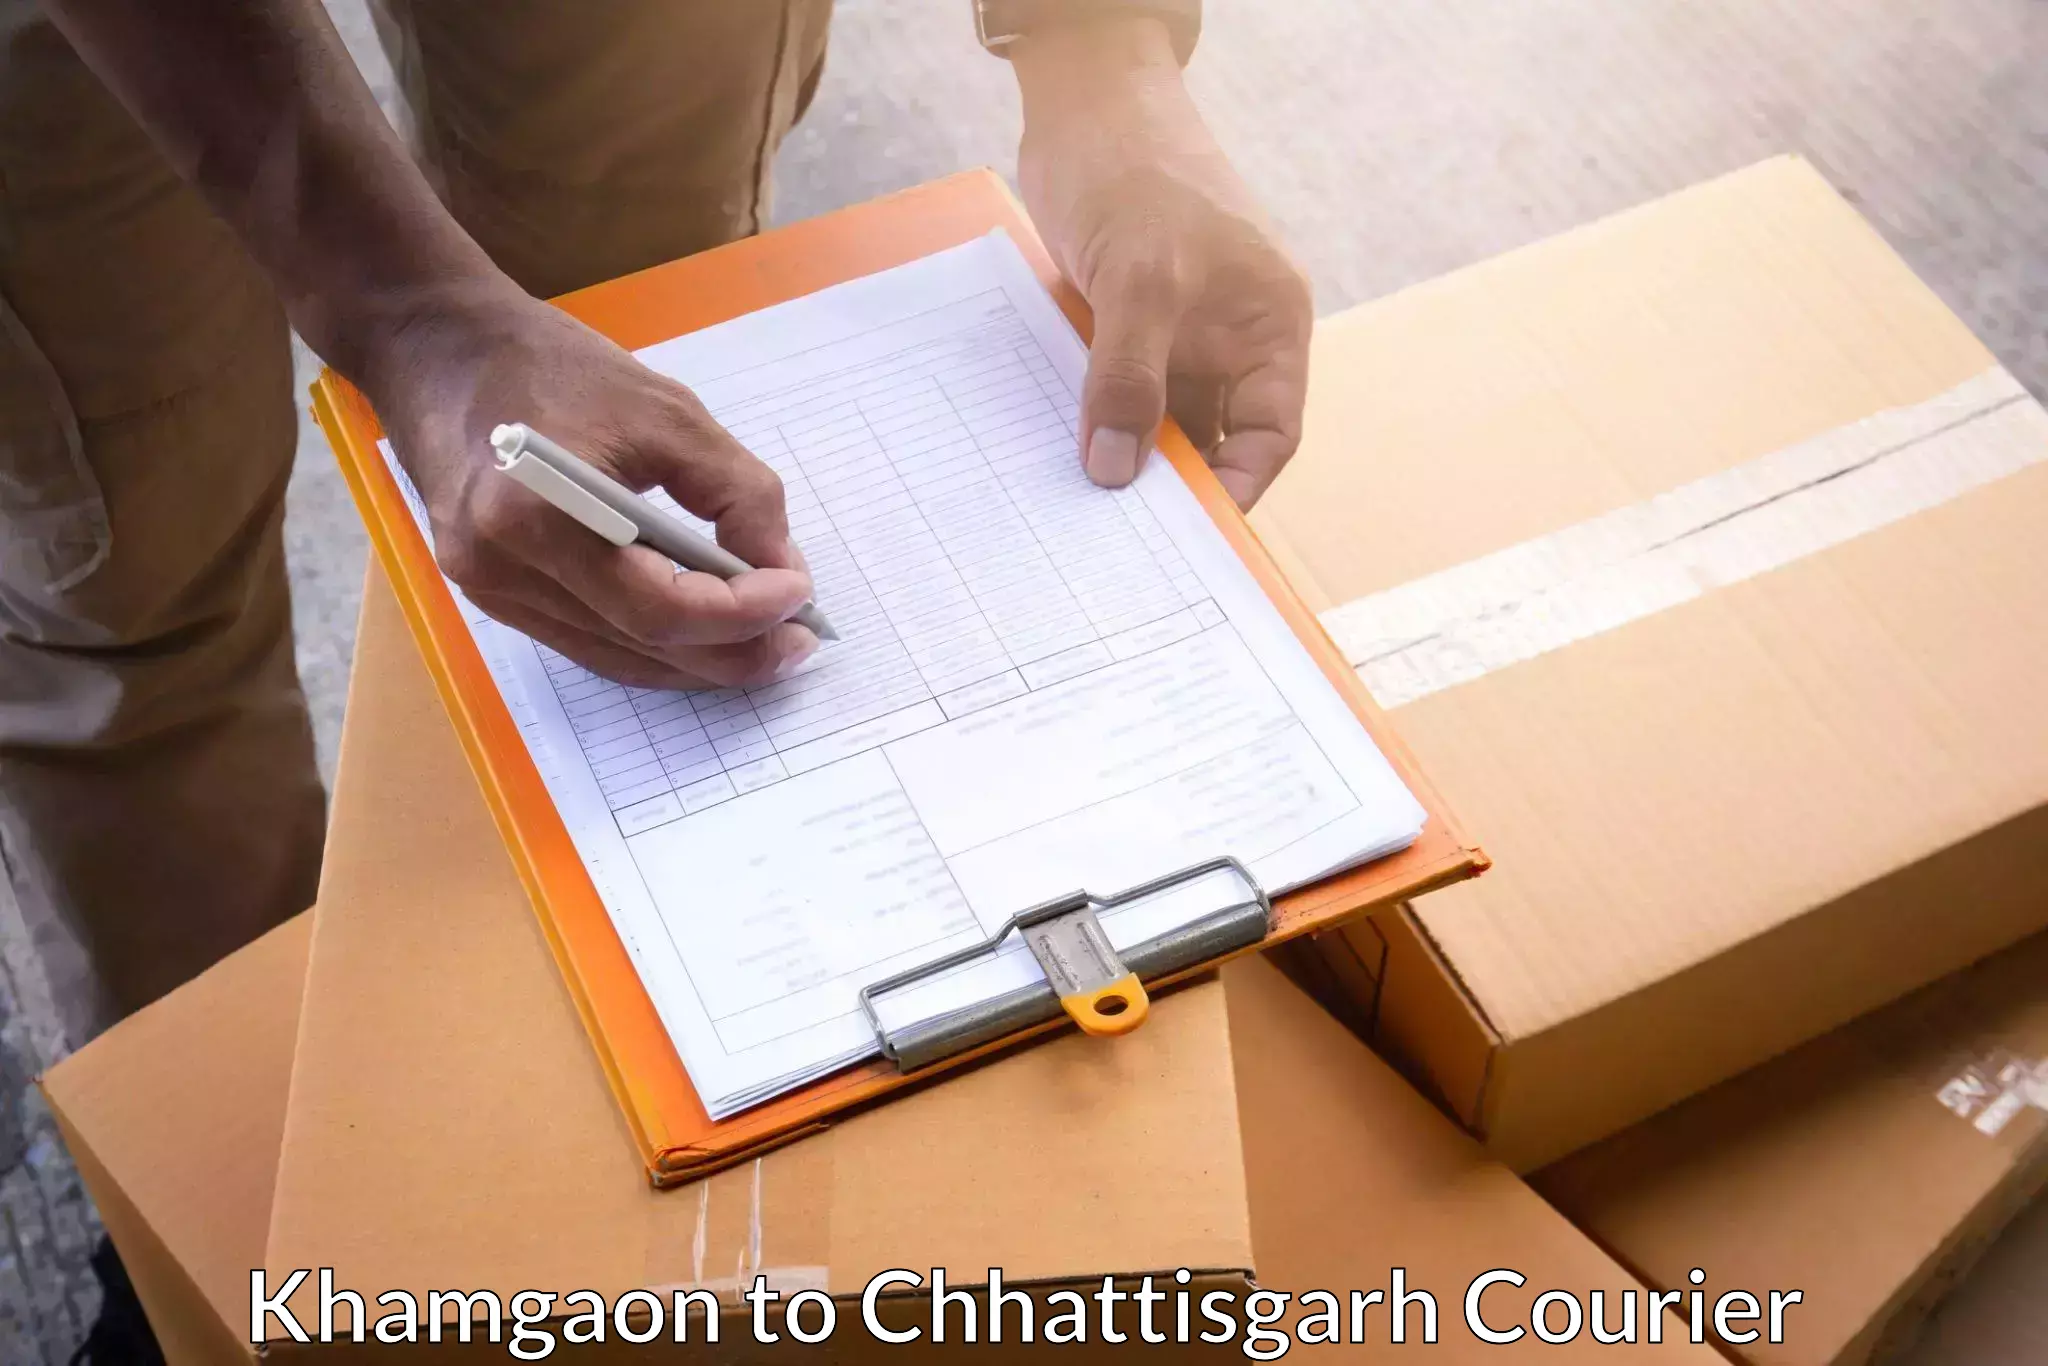 Courier service comparison Khamgaon to Manendragarh